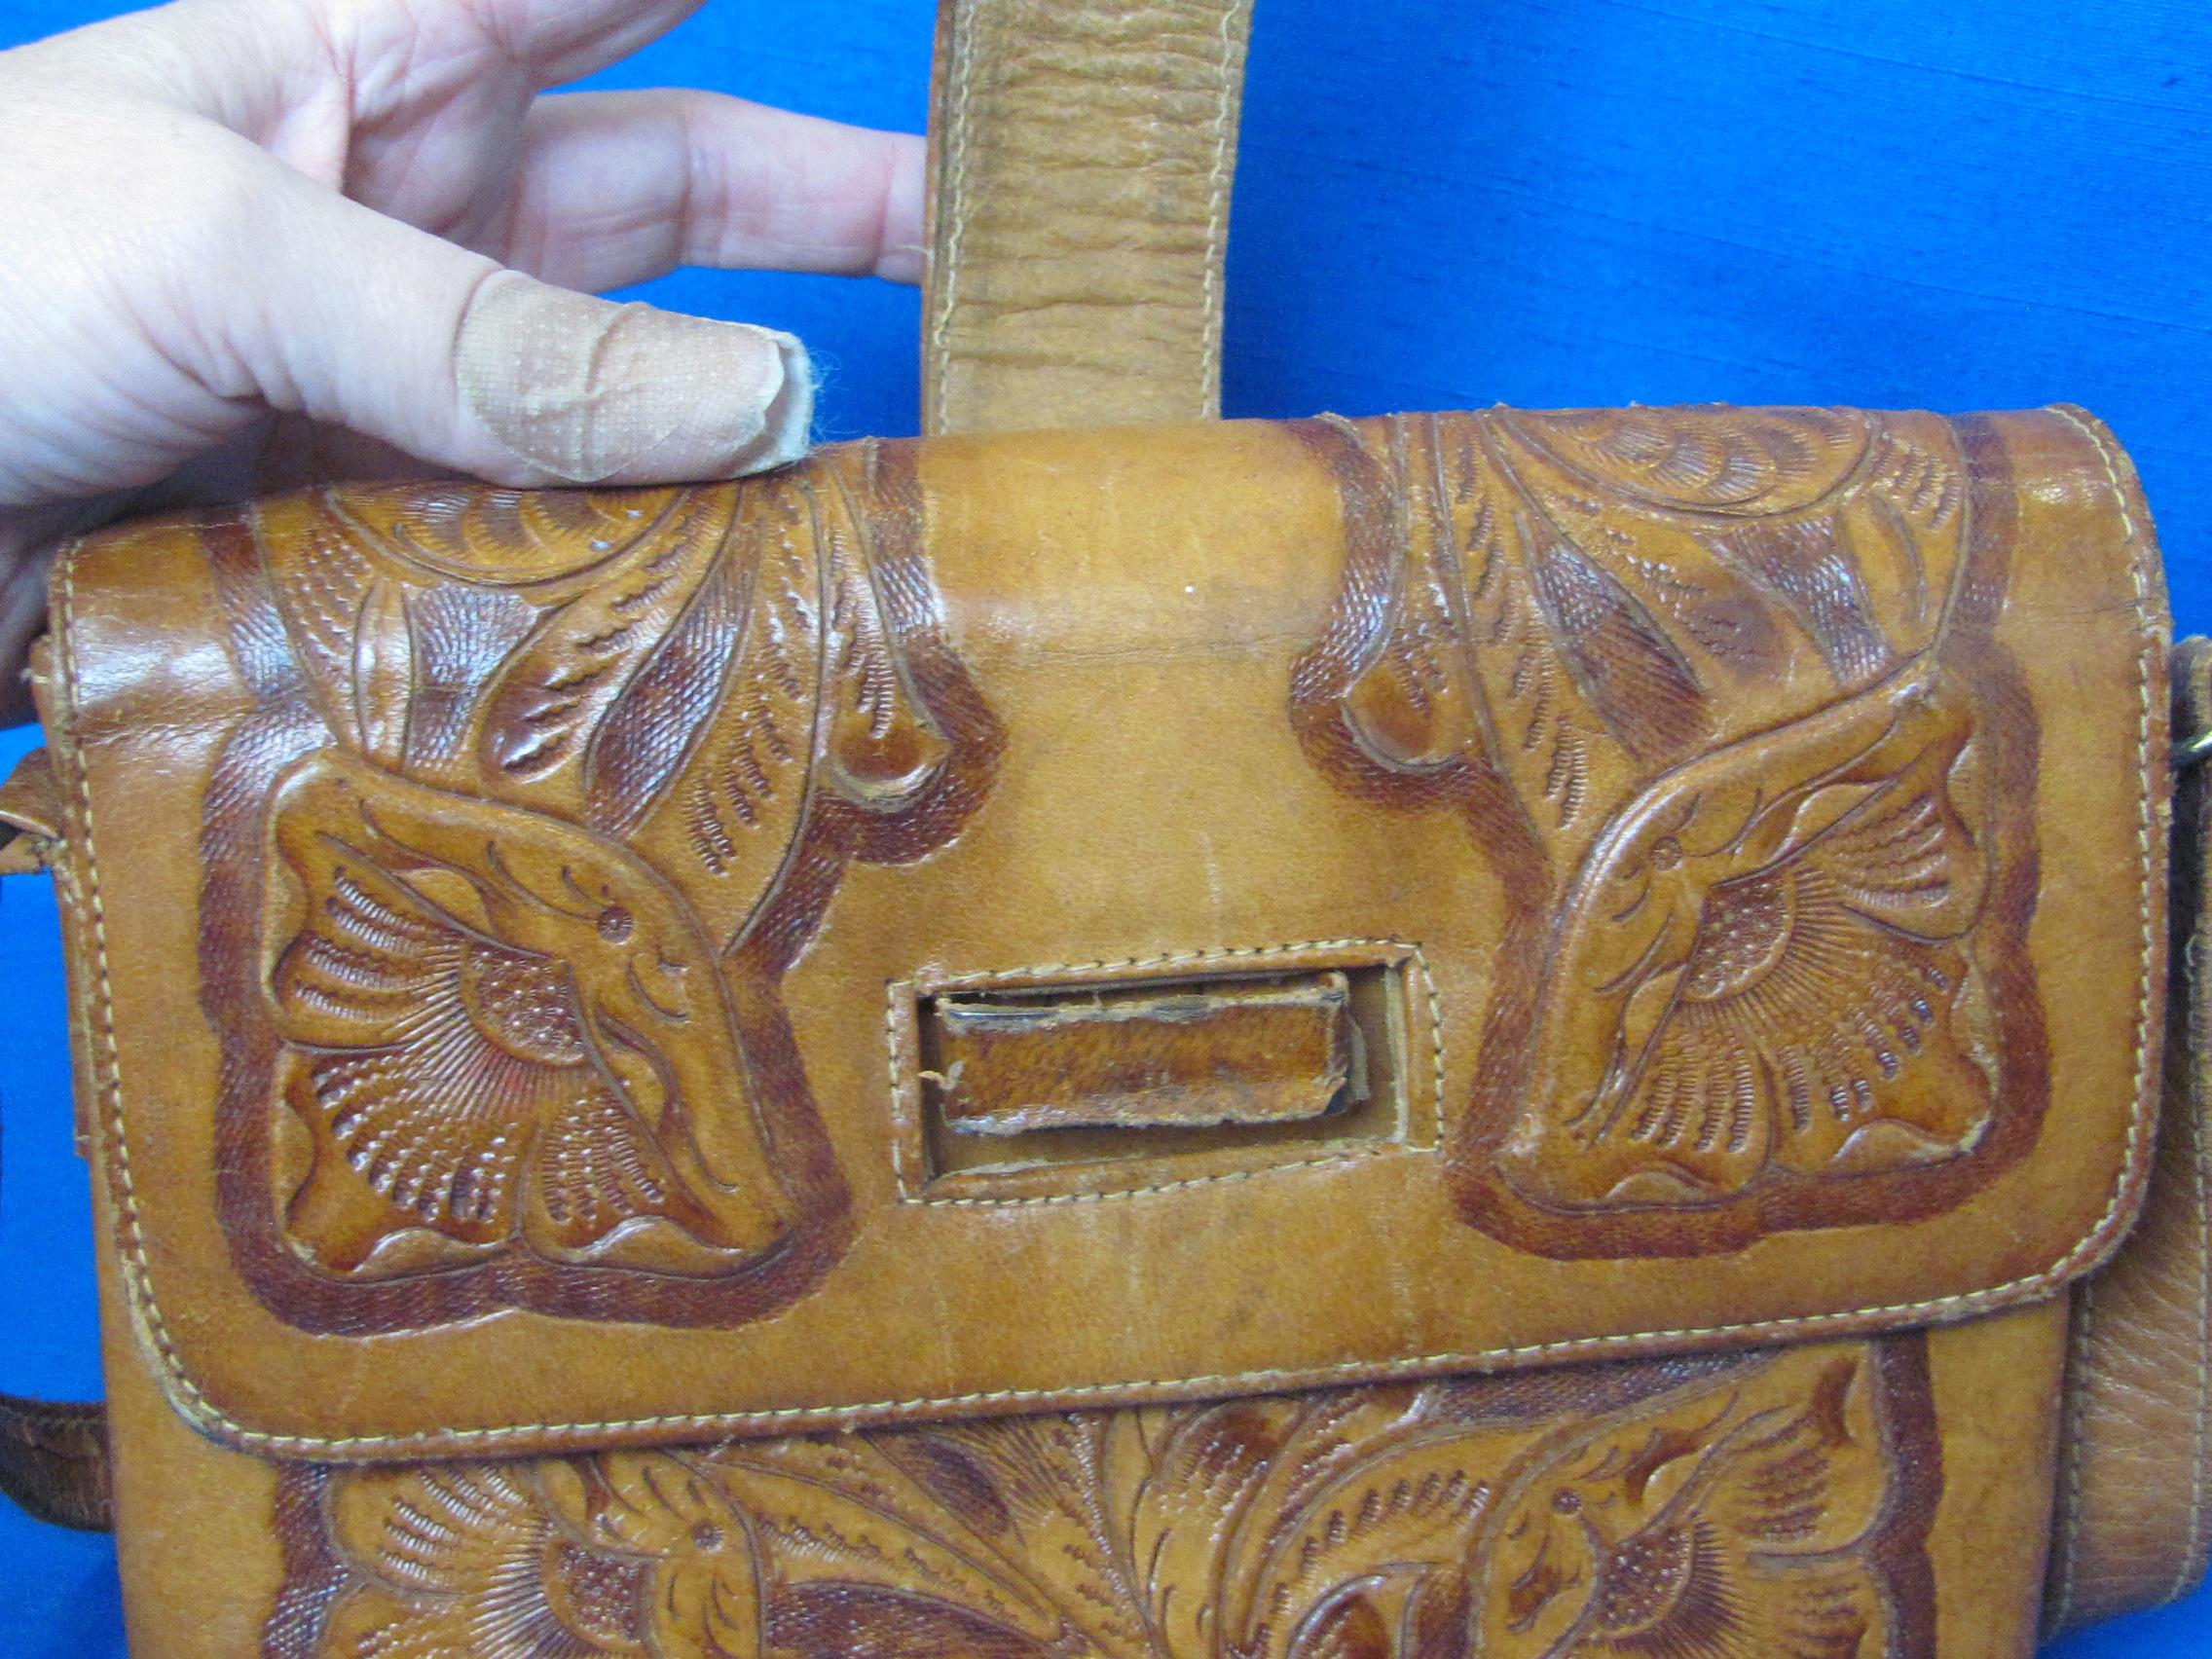 Vintage Tooled Leather Purse – Floral Design – About 8 1/2” x 6 1/2” - Straps need buckle